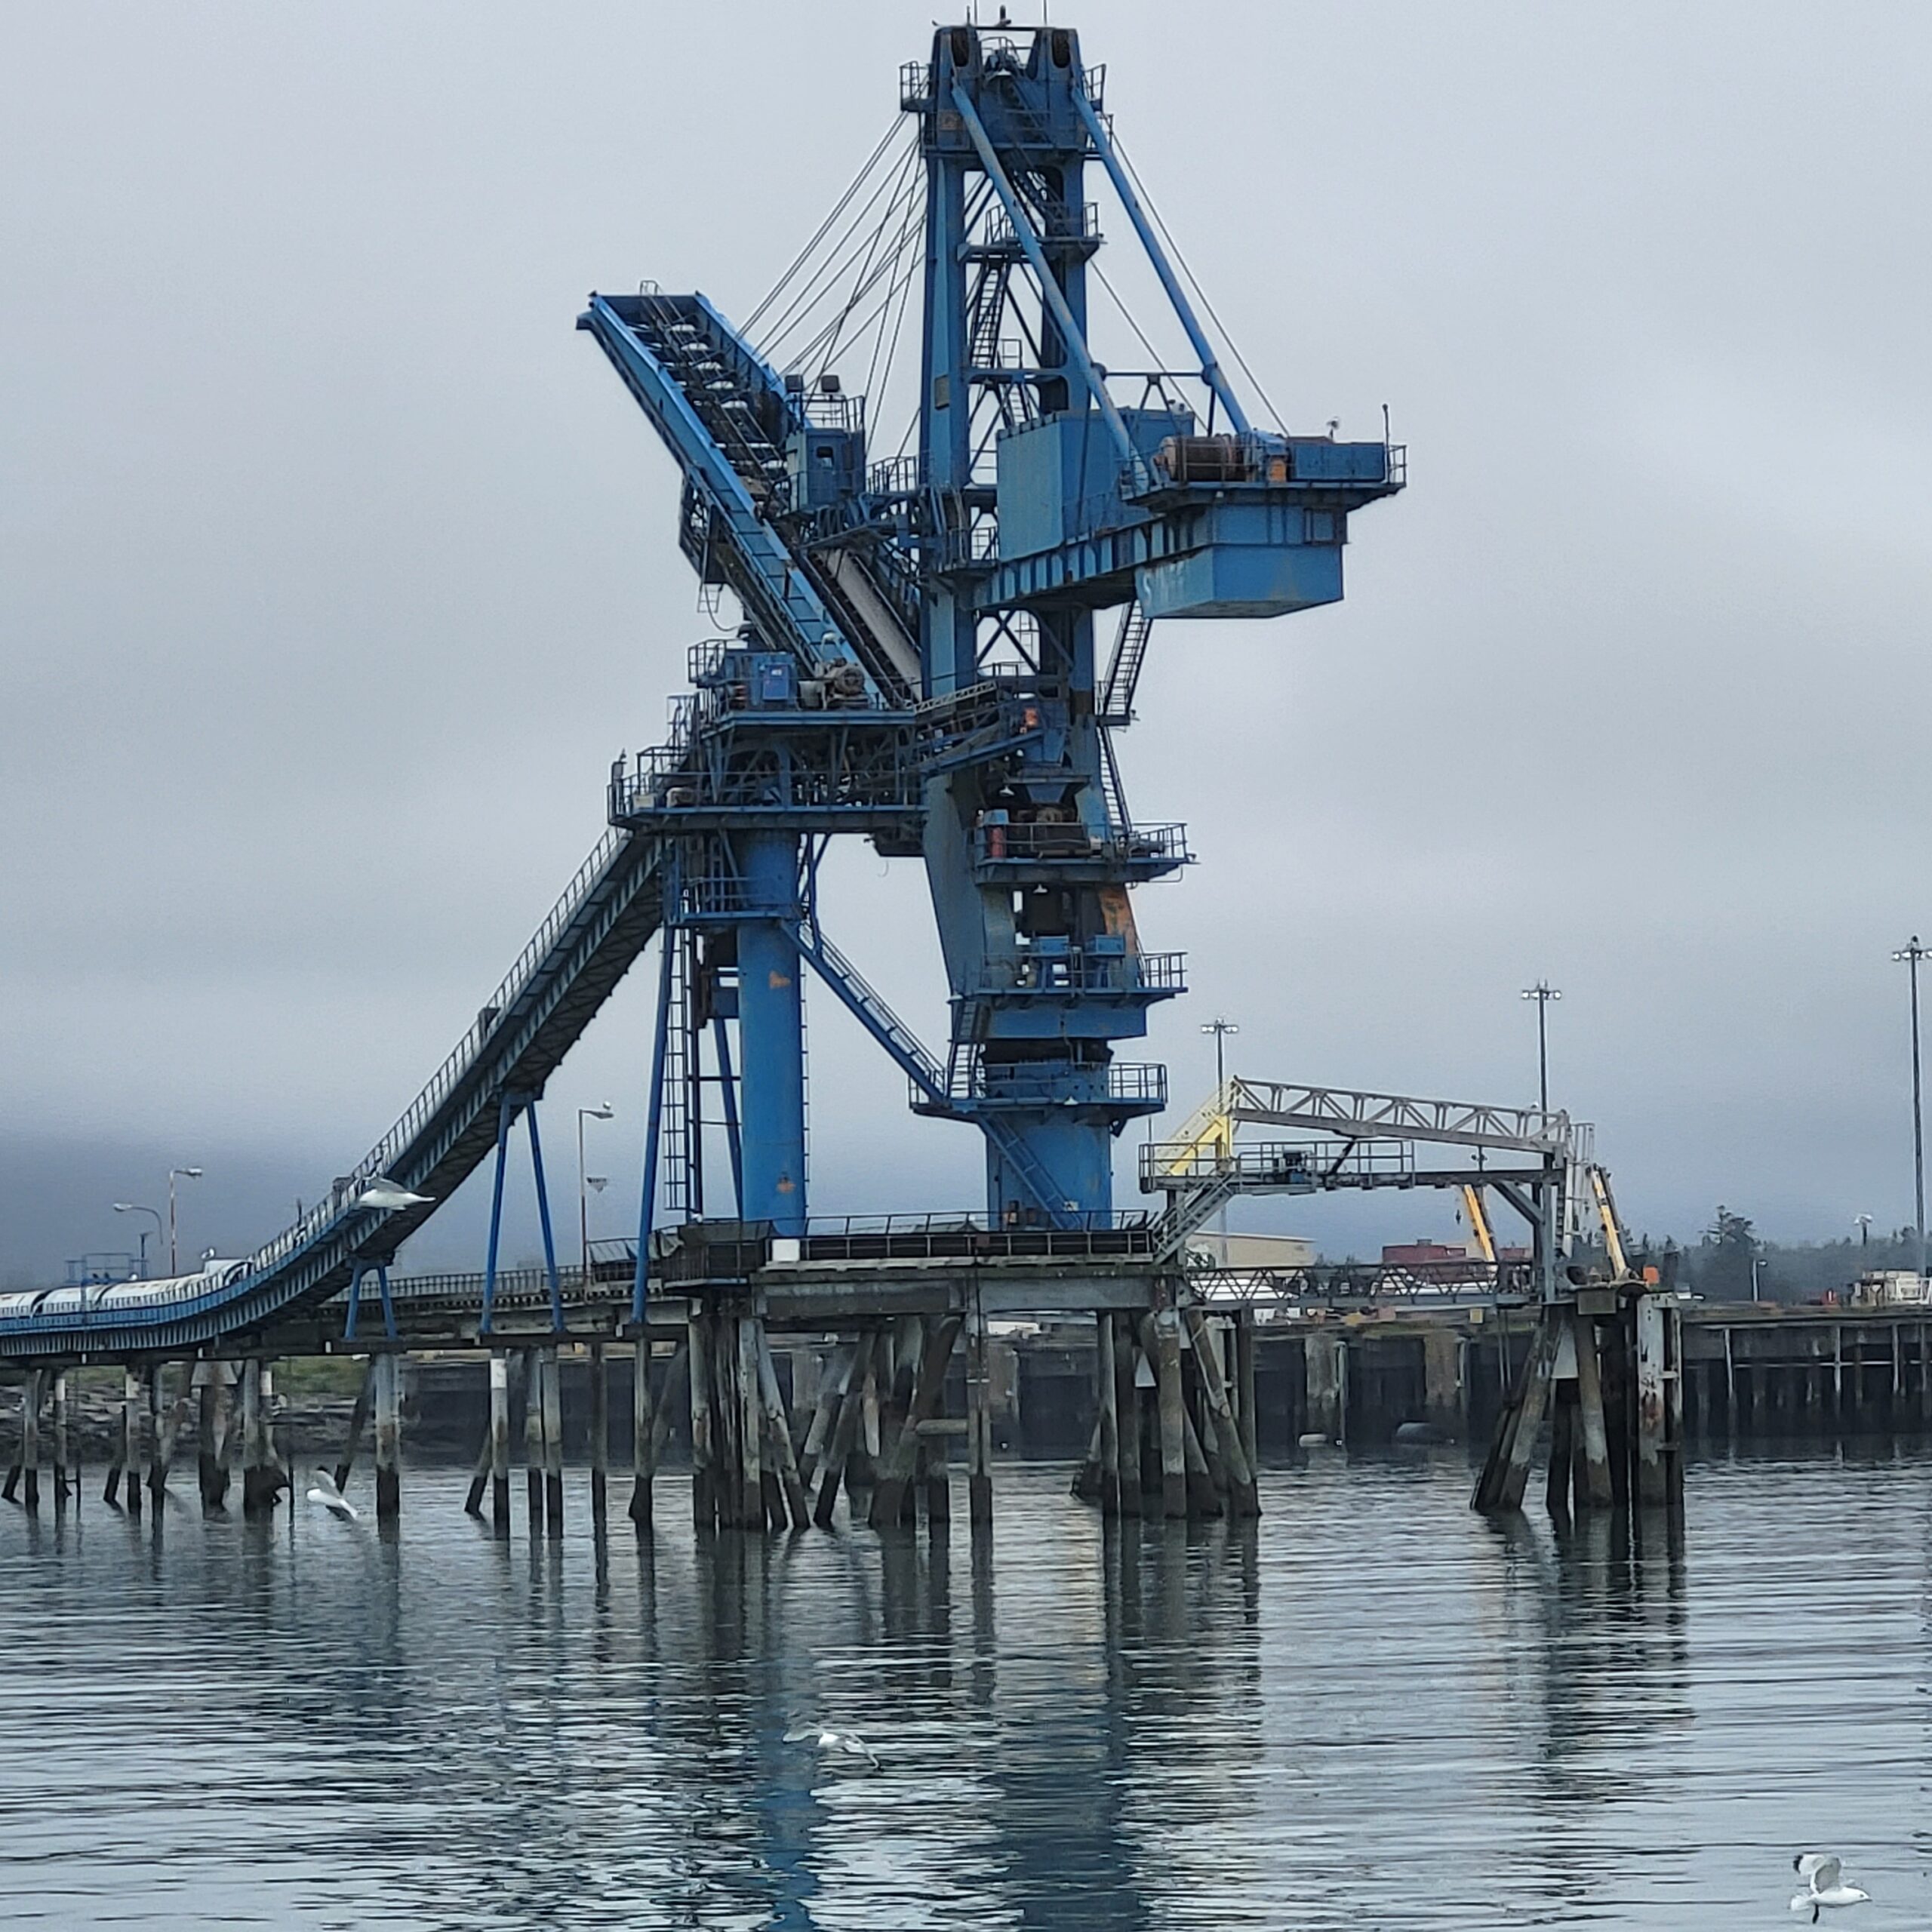 Massive industrial conveyor belt and loading equipment on a dock in a cloudy harbor.